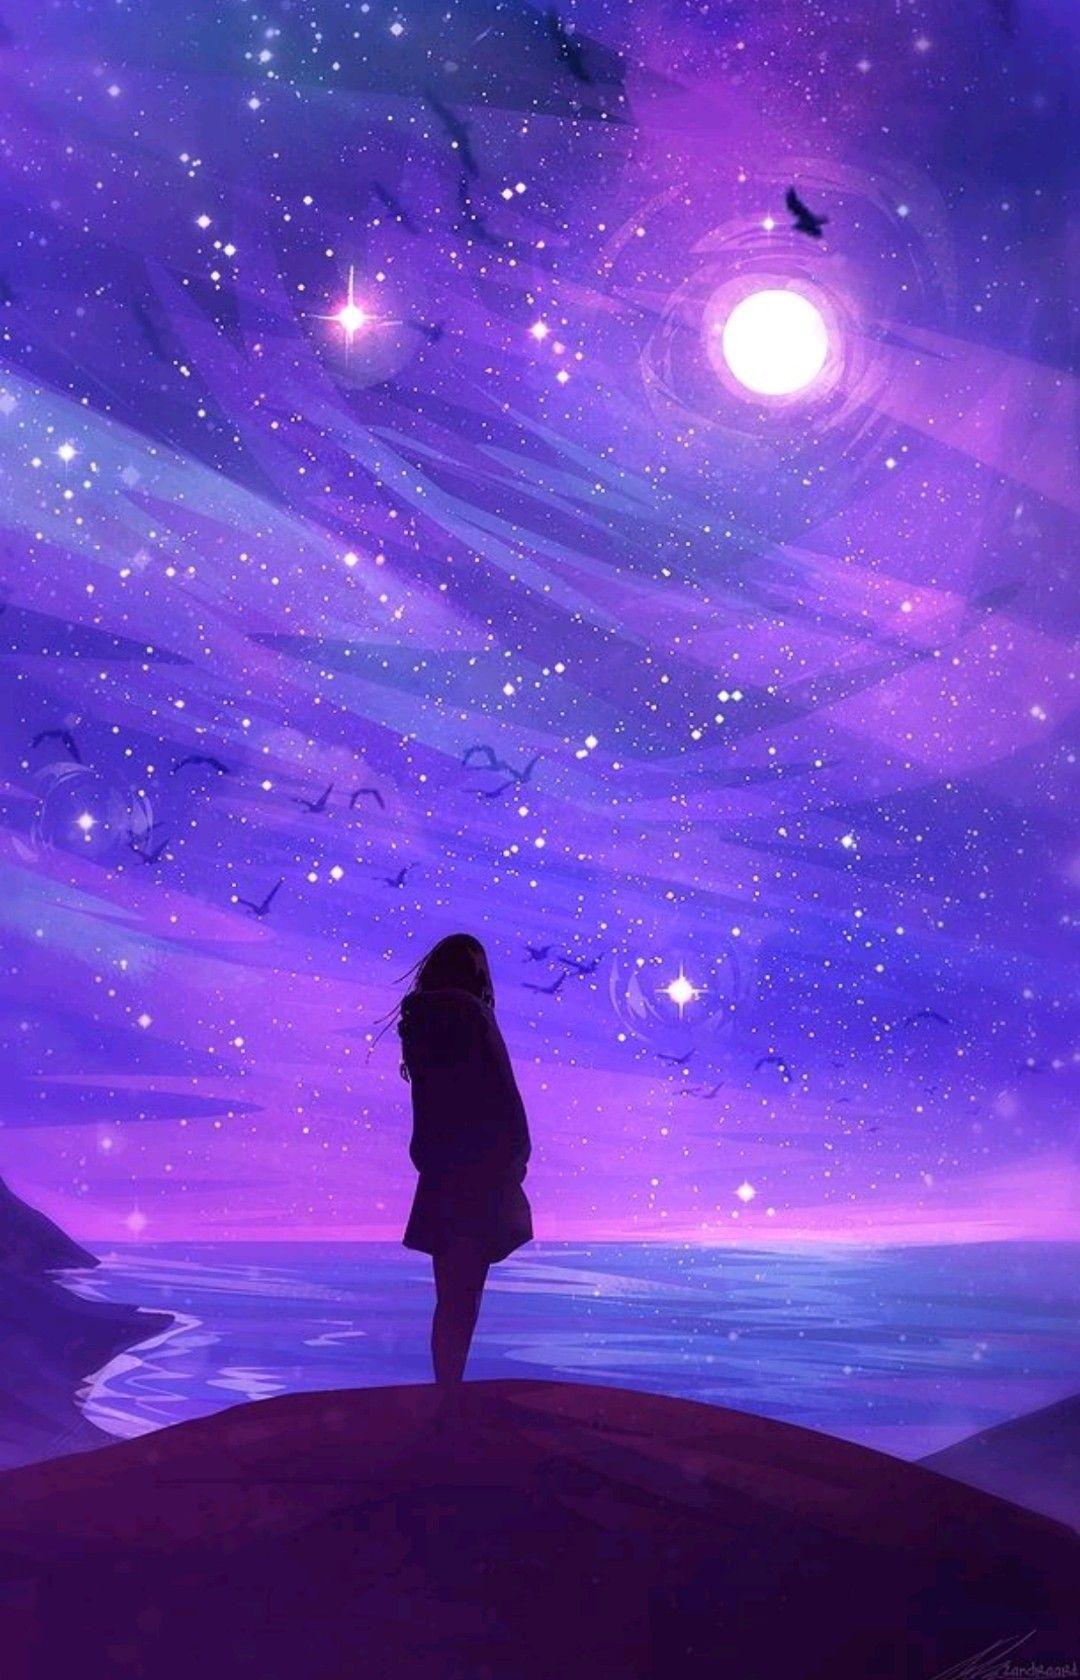 Girl Silhouette. Countless Stars Over the Shore, Shining brightly forevermore. Beautiful Art. Art wallpaper, Anime scenery, Animation art